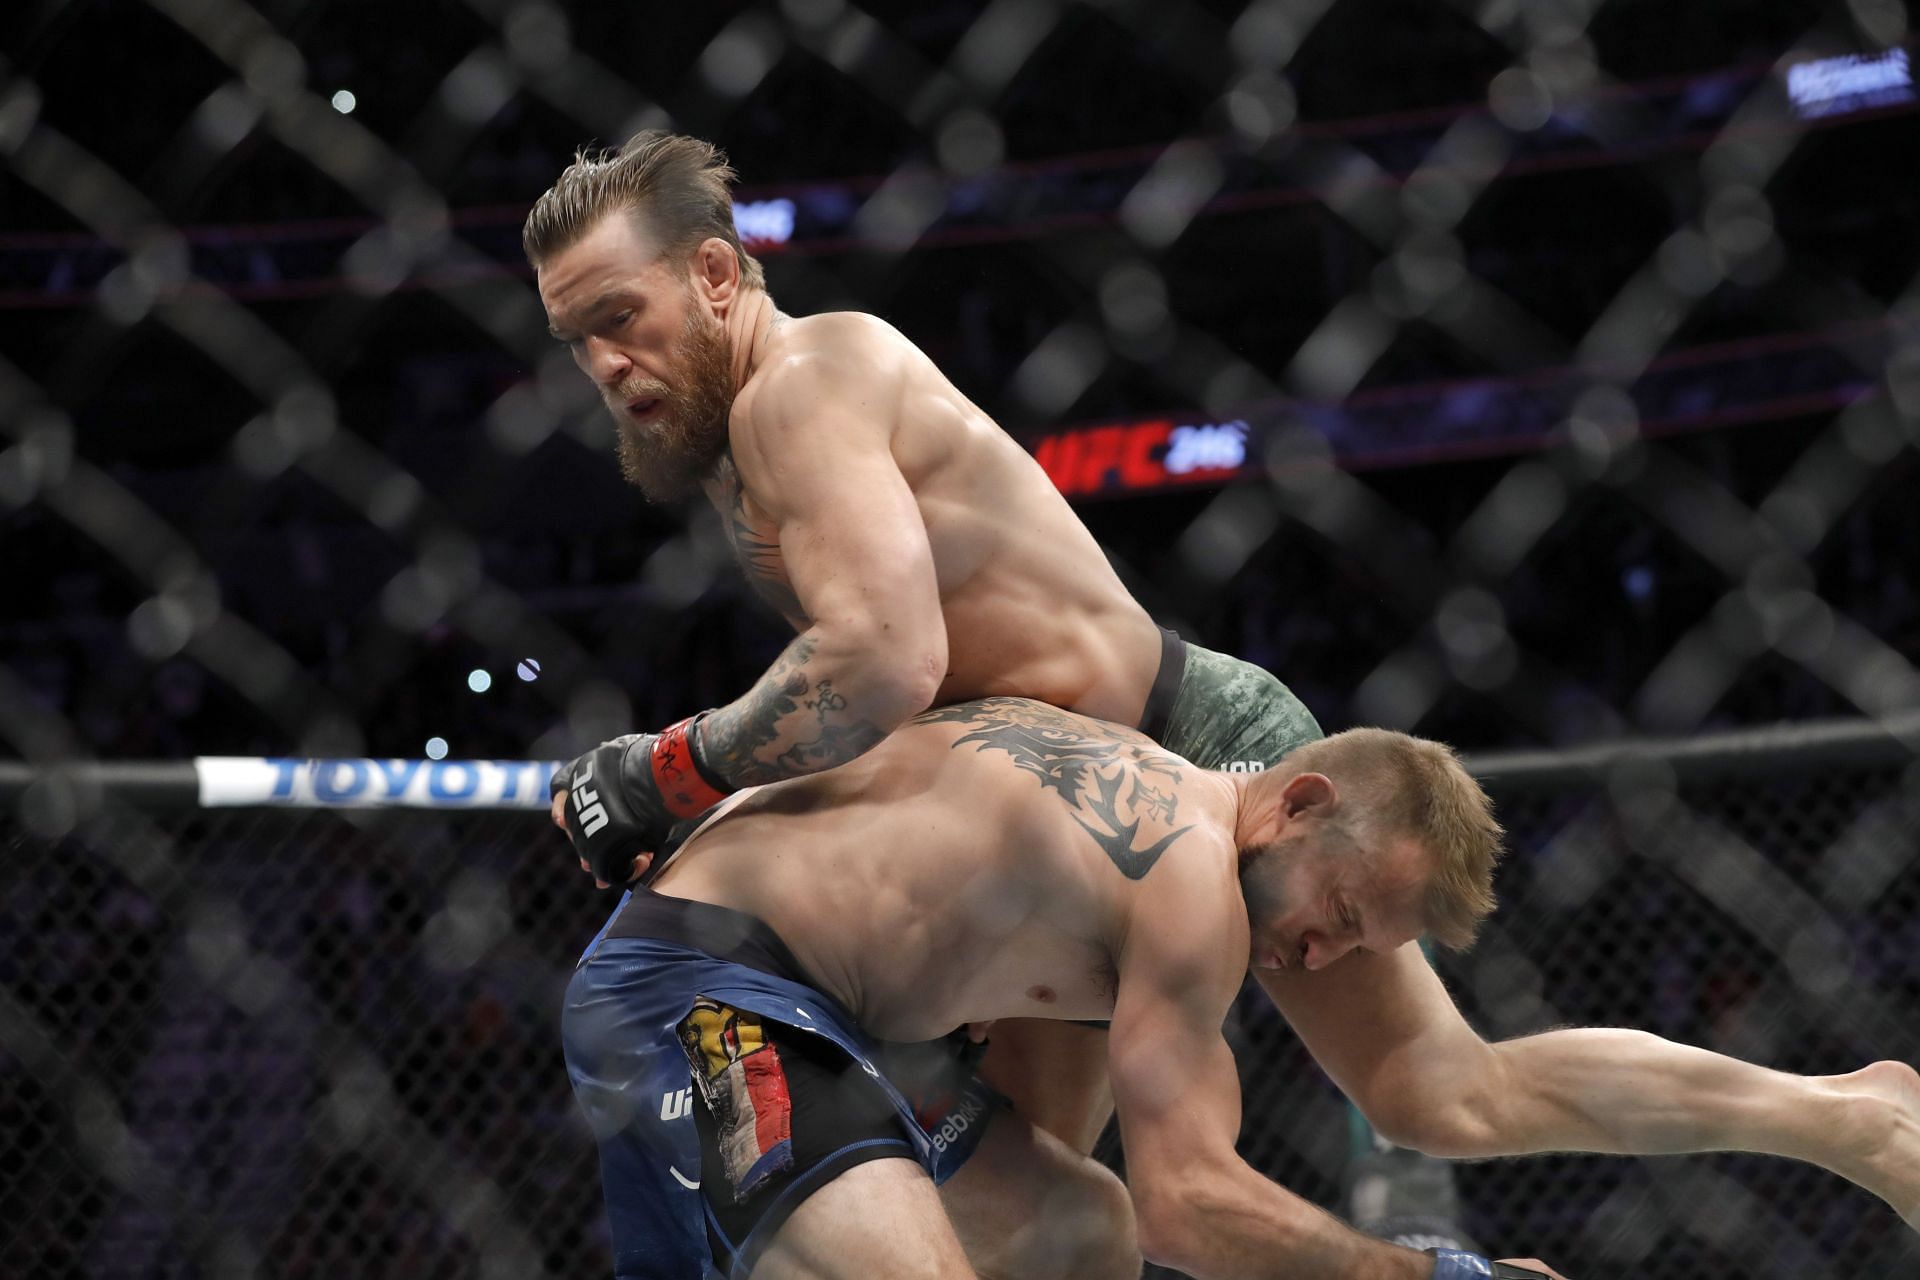 McGregor has not won a fight since his 2020 win over Donald Cerrone